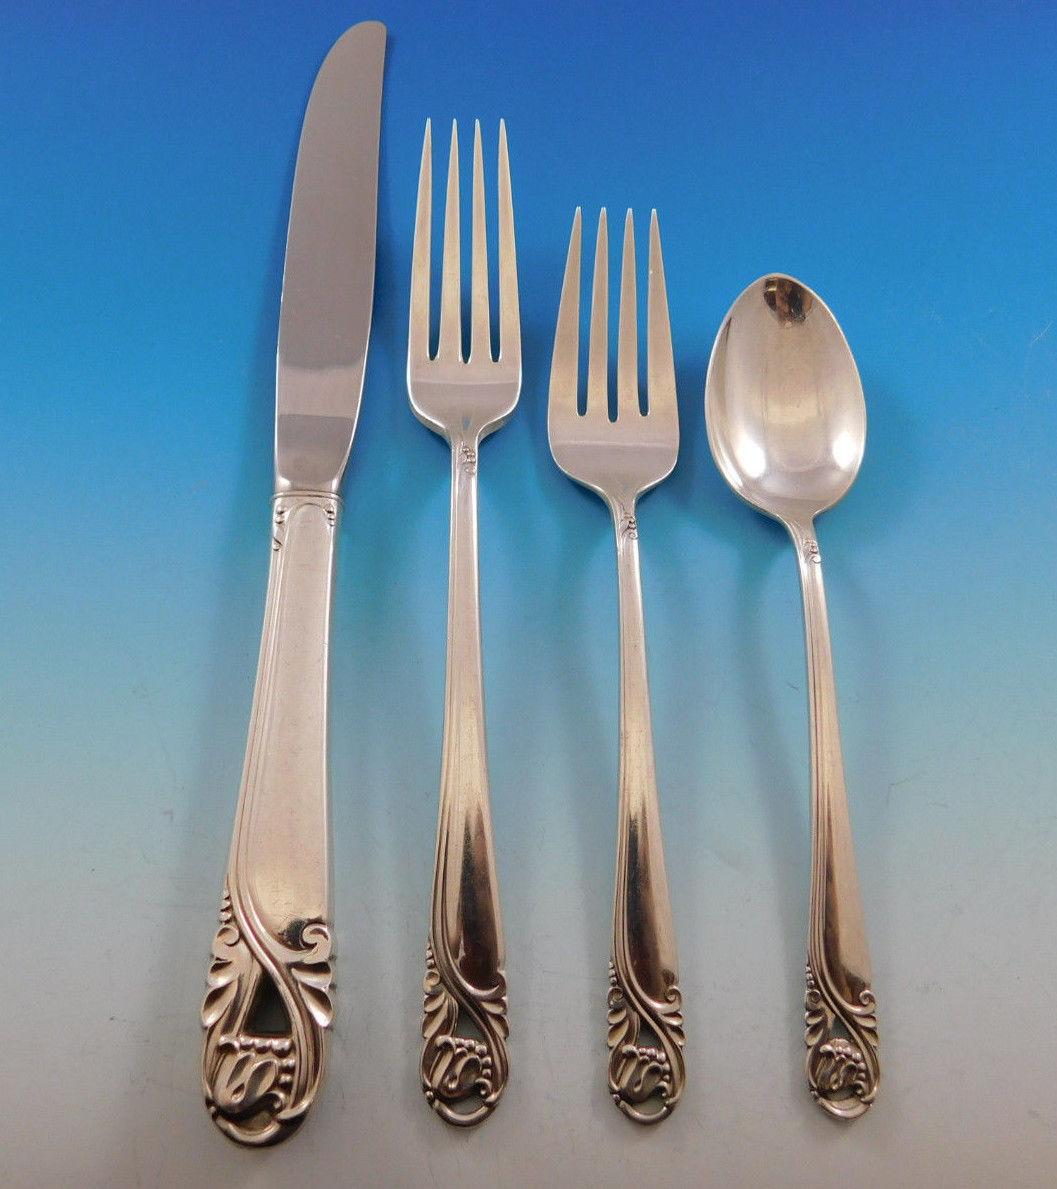 Spring Glory by International sterling silver flatware set of 48 pieces. This pattern was introduced by International in the year 1942 and was designed by Lillian V.M. Helander, daughter of Swedish immigrants - a true pioneer woman designer in the